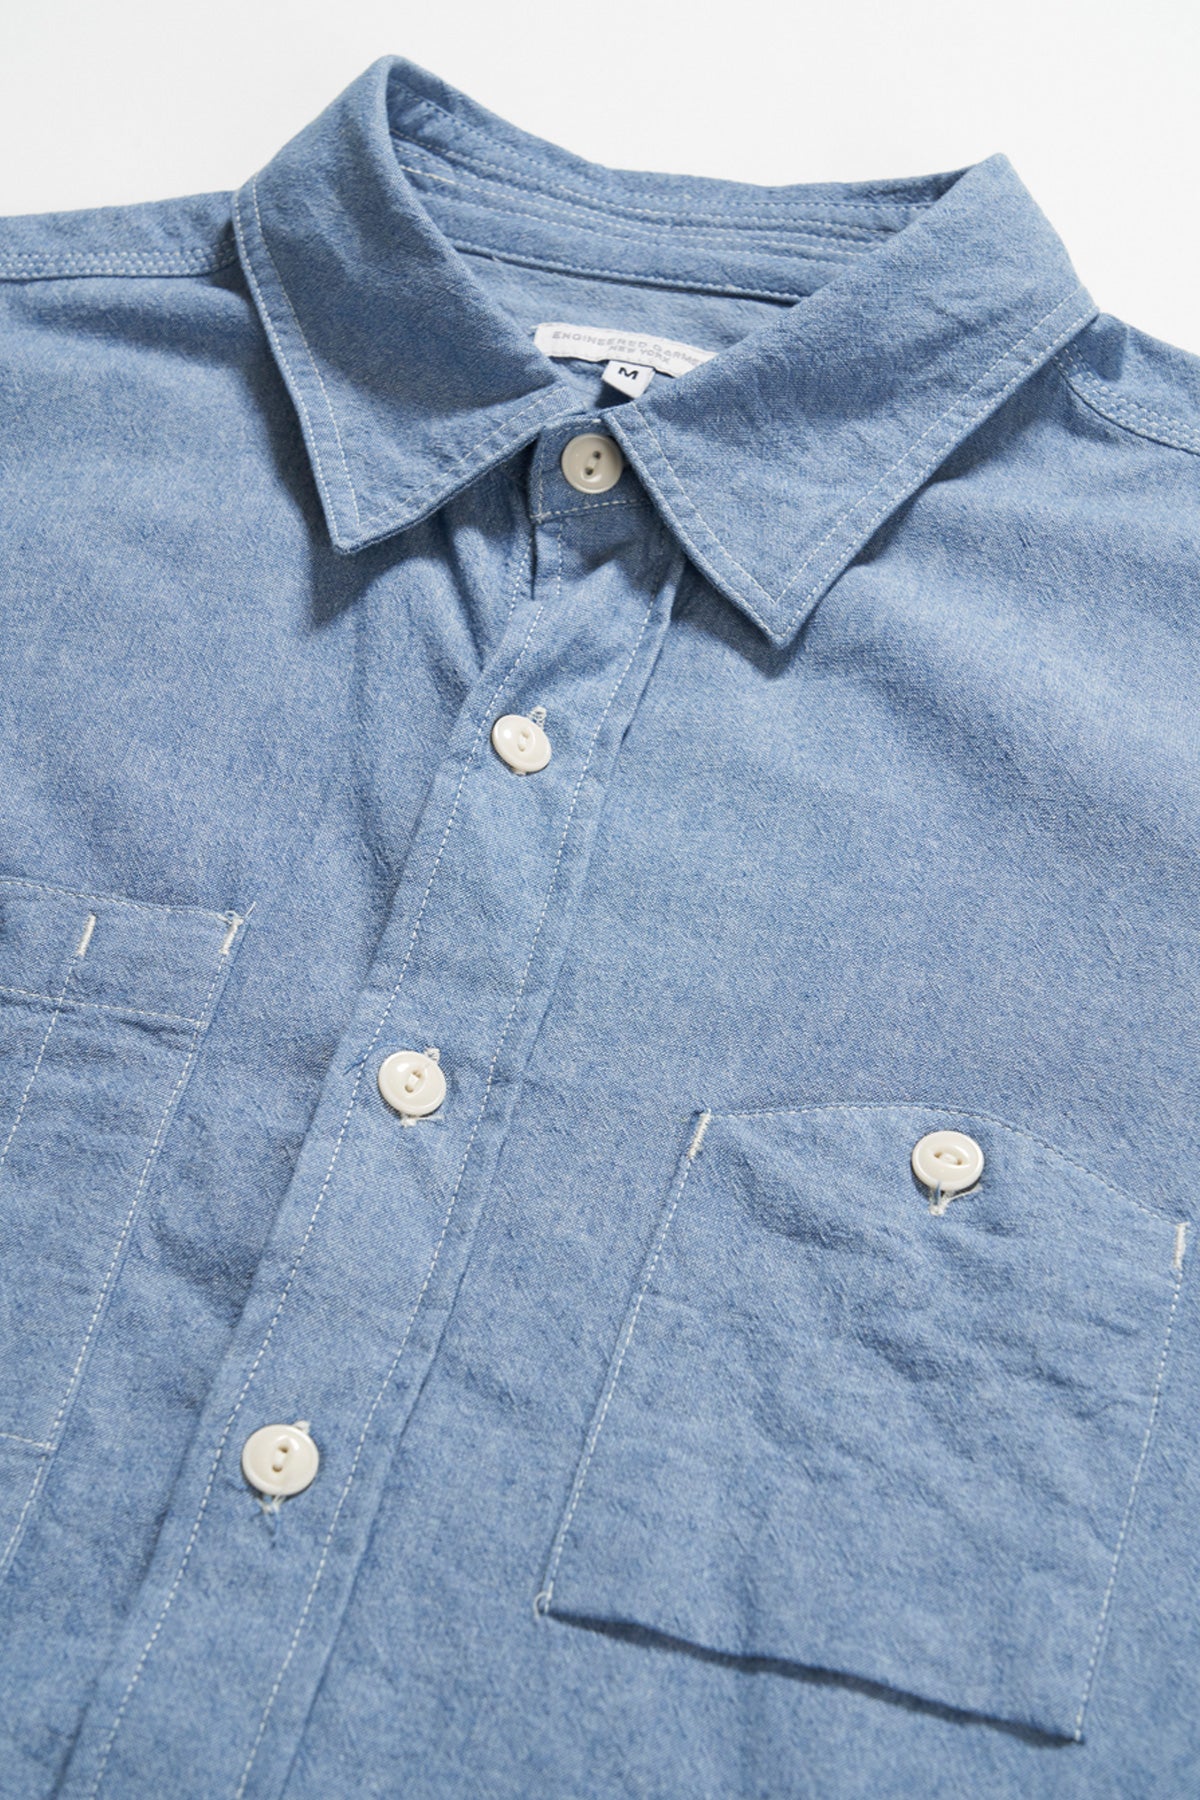 chambray everyday - M Loves M